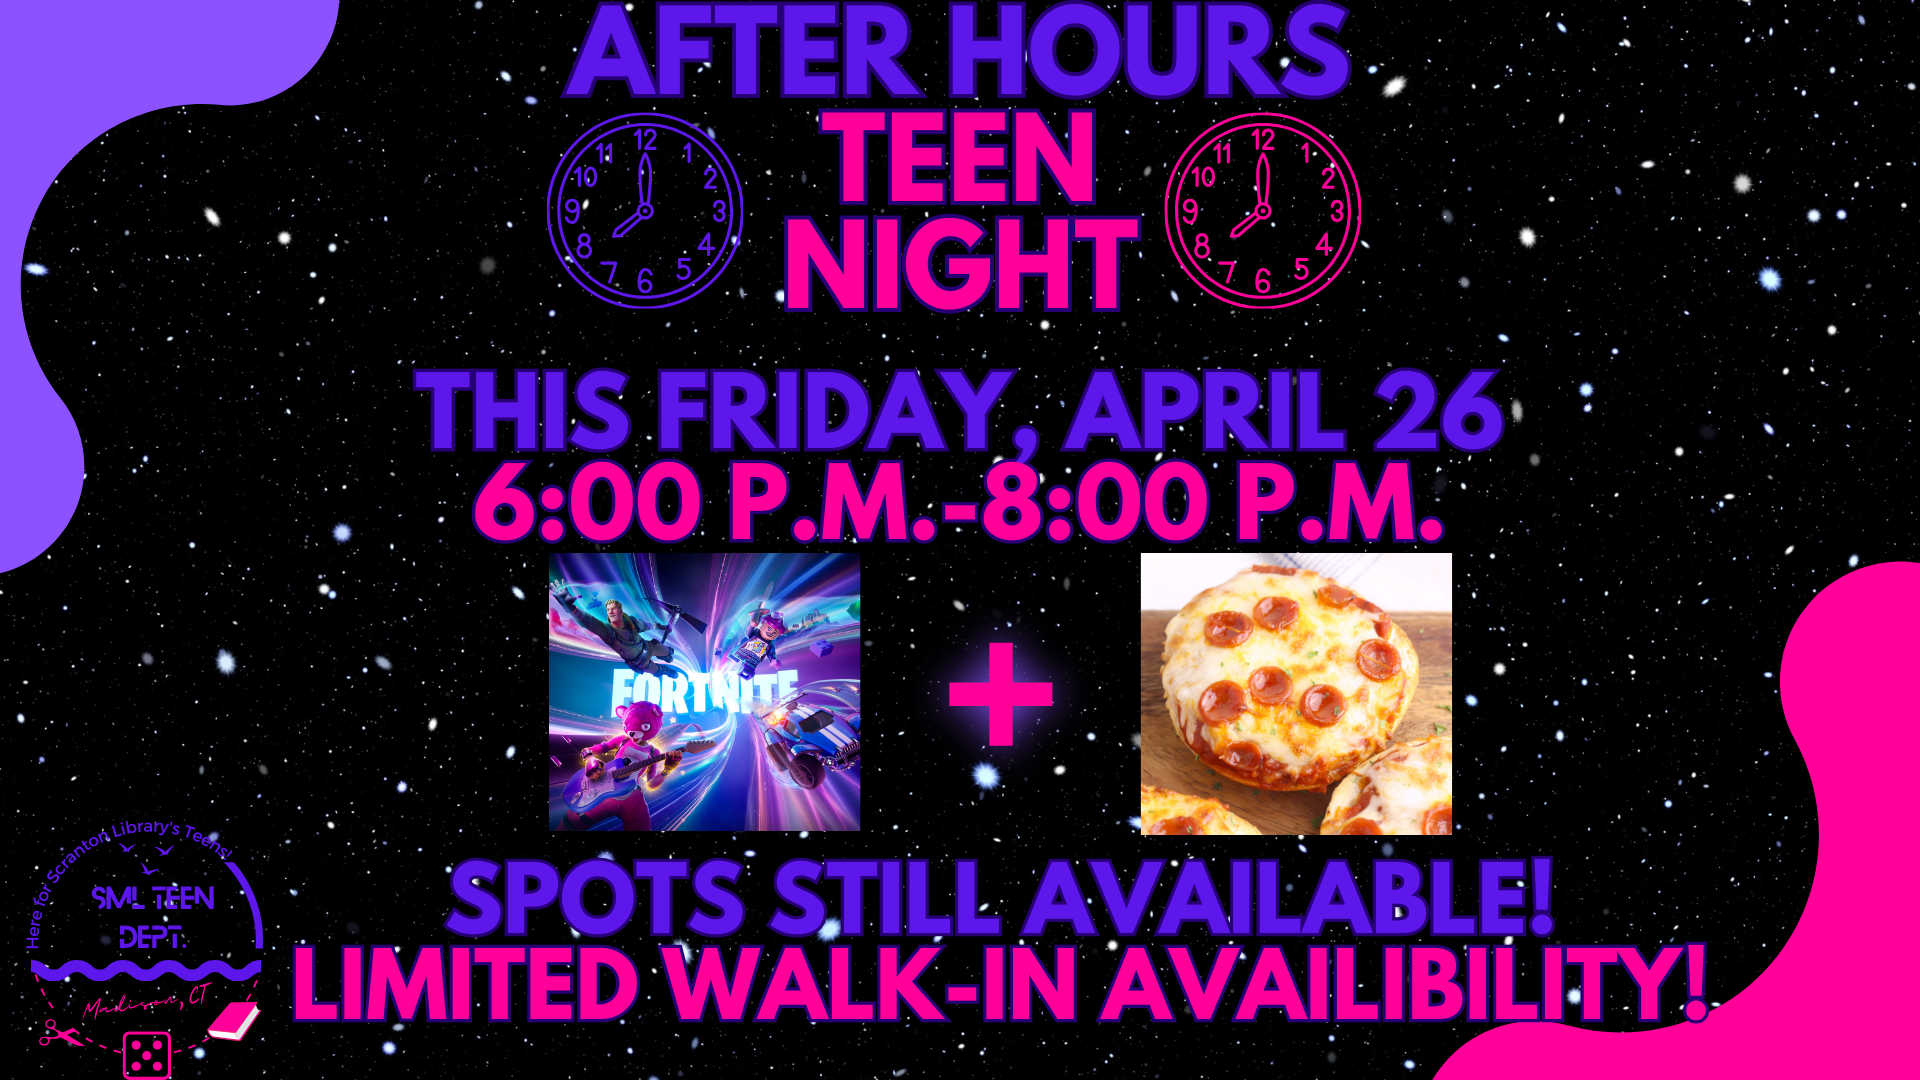 Ad for Friday's After Hours Teen Night